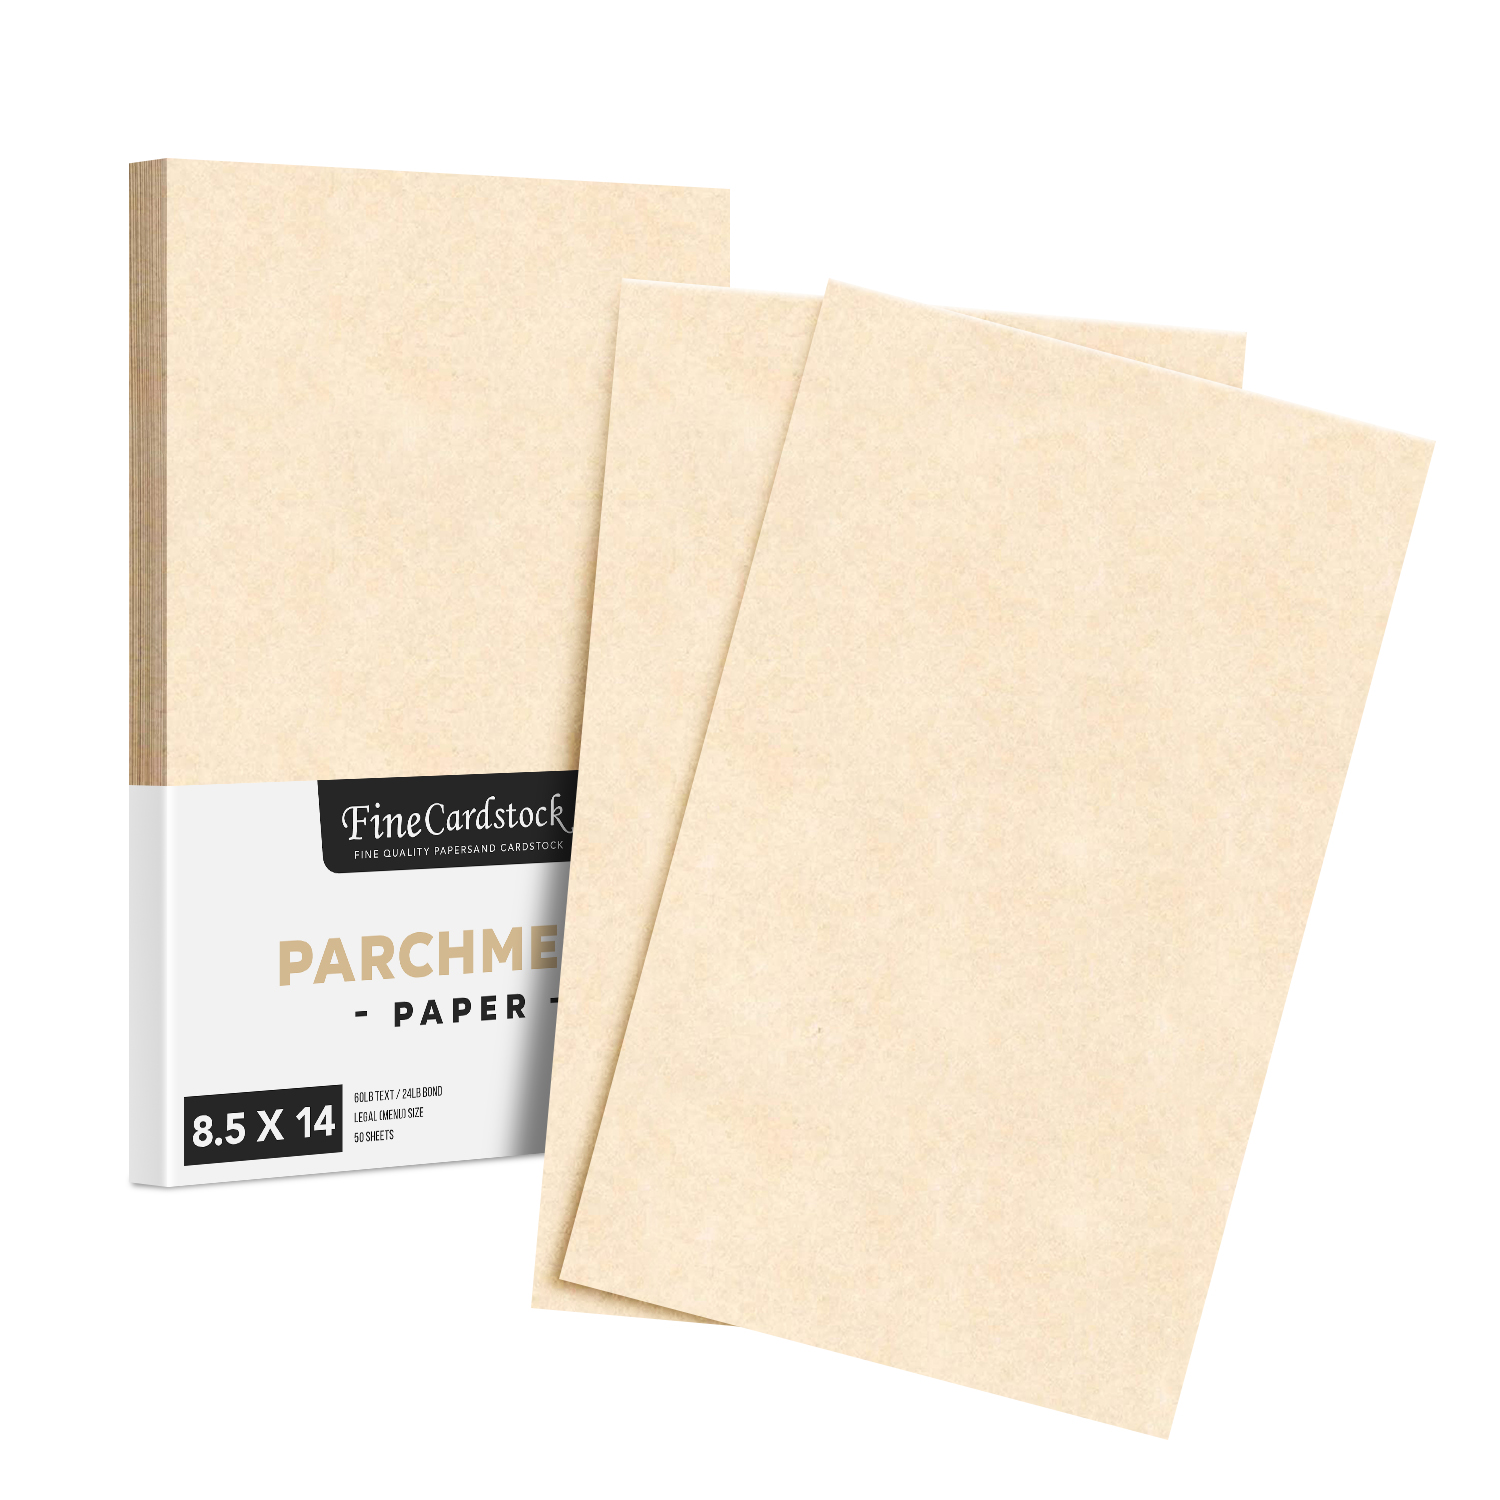 Parchment Paper Text 24lb Size 8.5 x 11 Inches 500 Sheets per Pack (Aged)